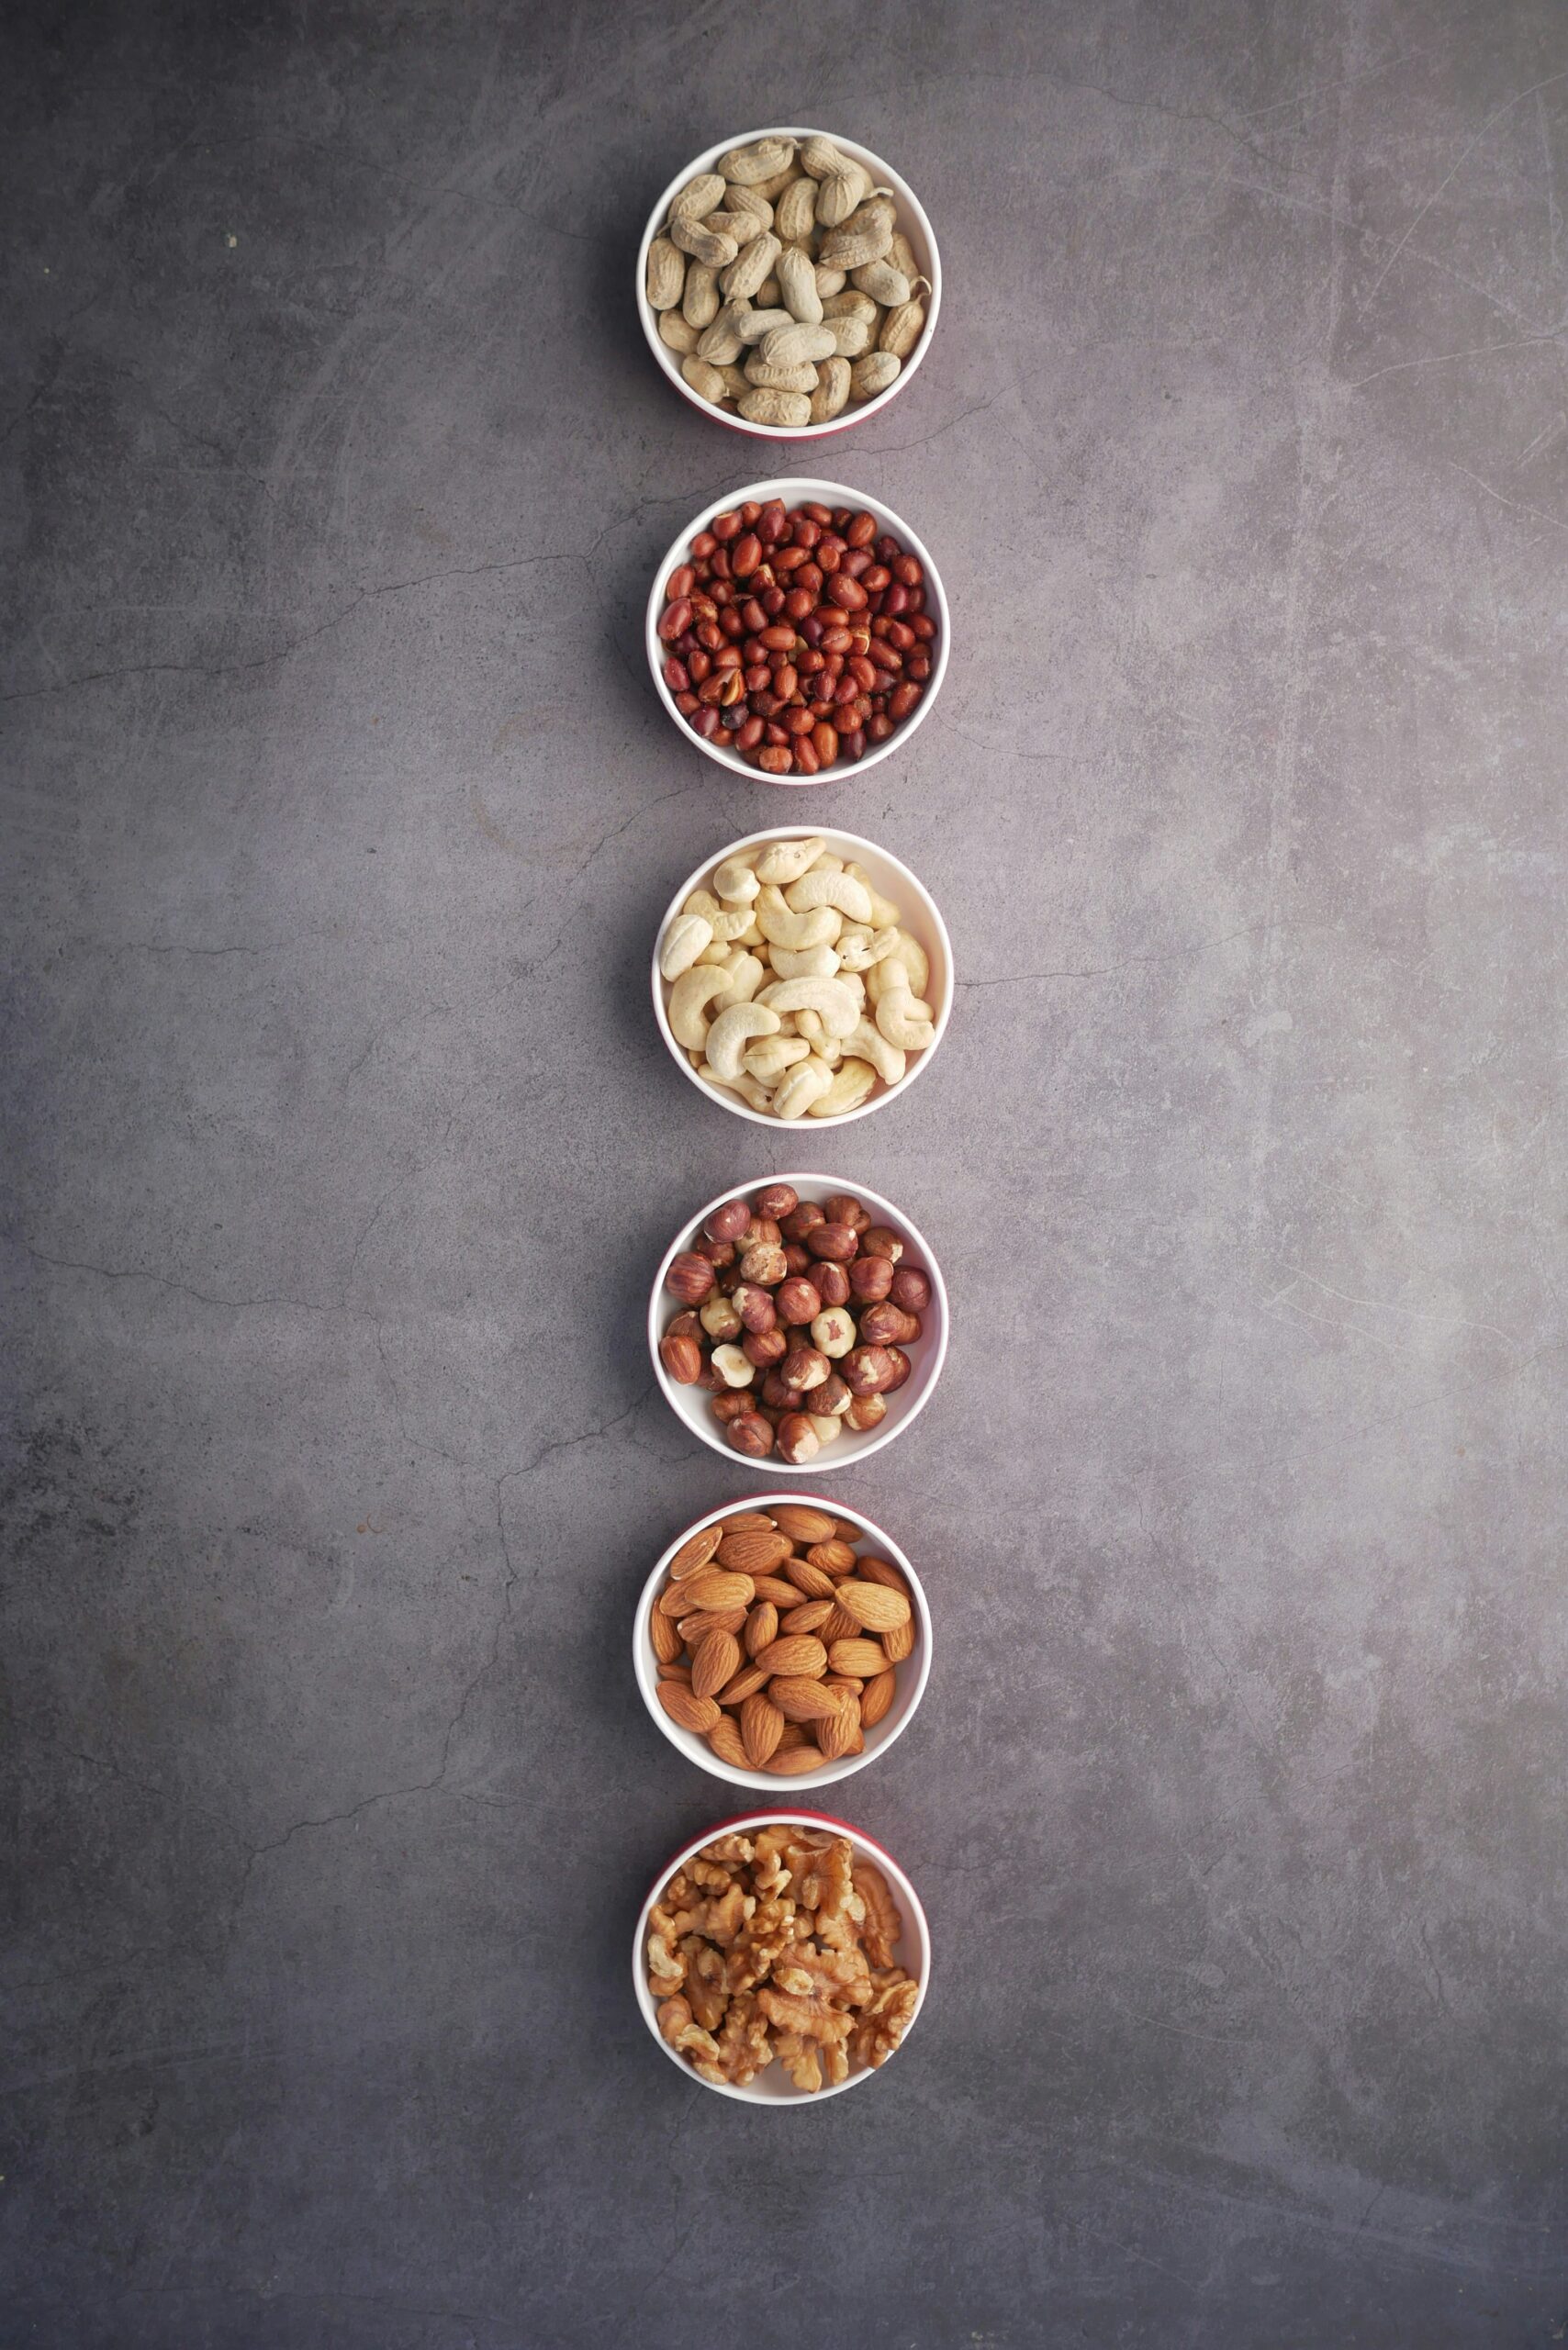 Top down view of six small bowls, sitting on a grey stone surface, each filled with a different type of nuts